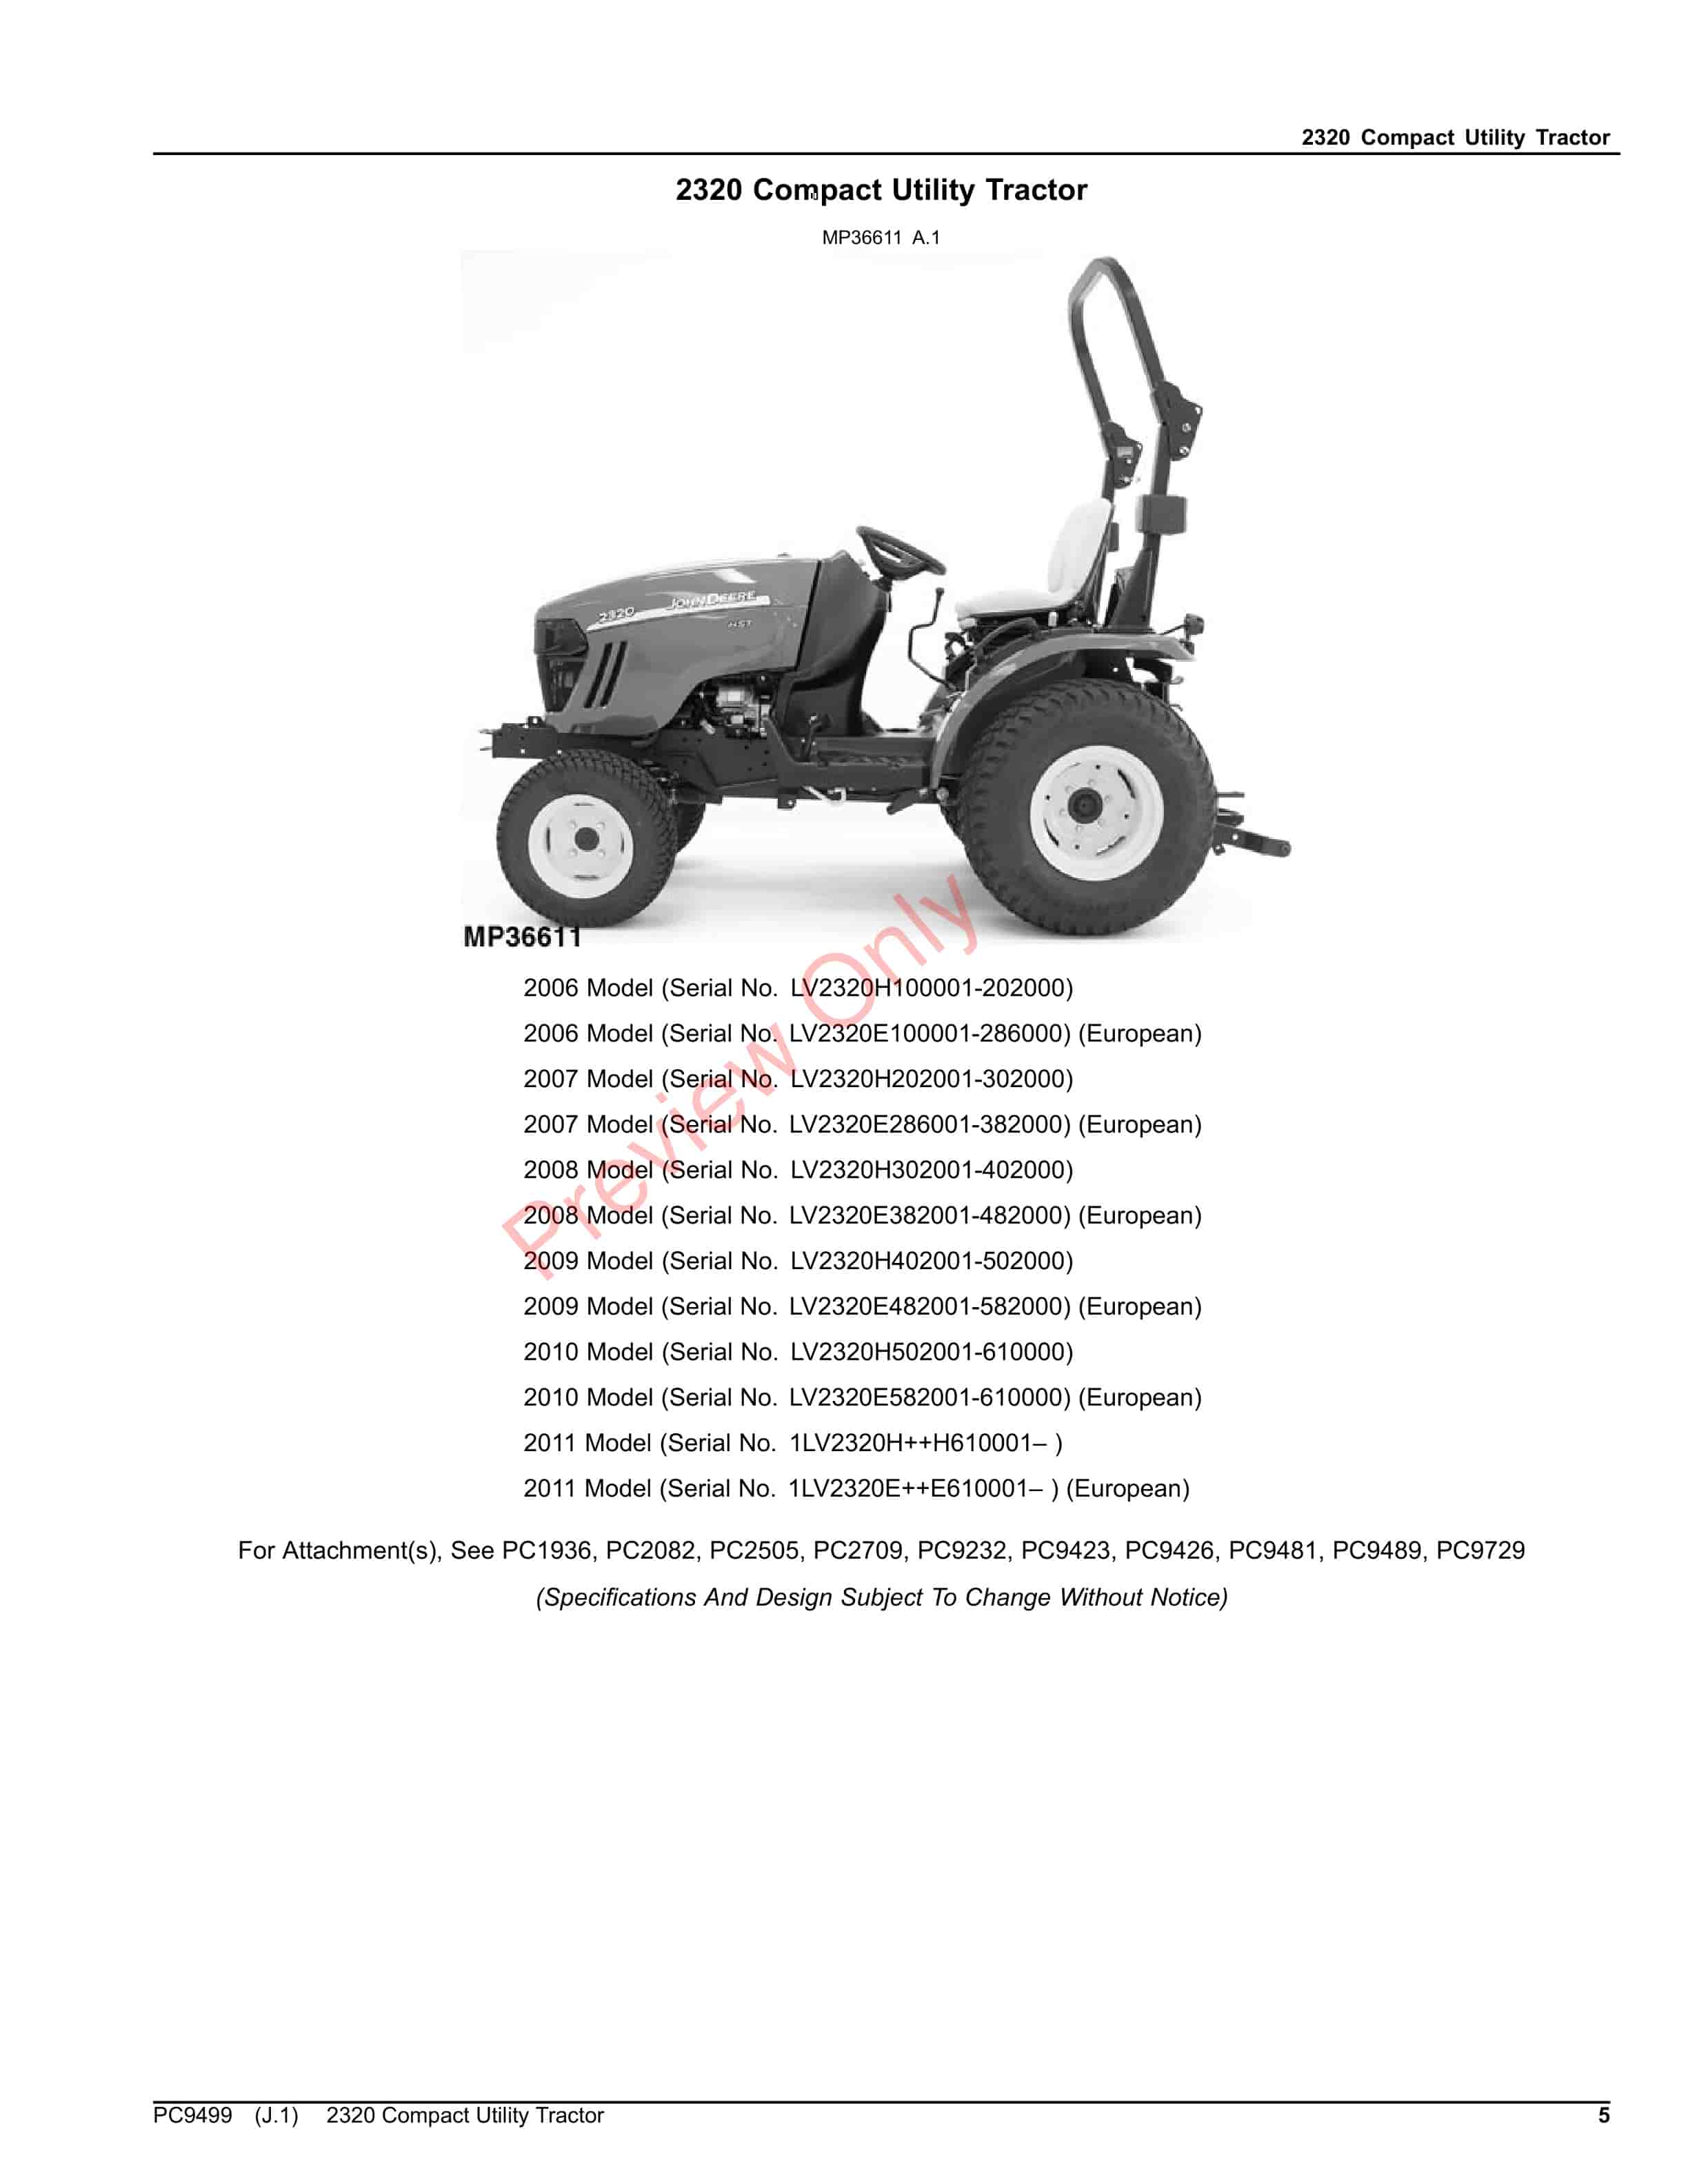 John Deere 2320 Compact Utility Tractor Parts Catalog PC9499 08SEP23-5